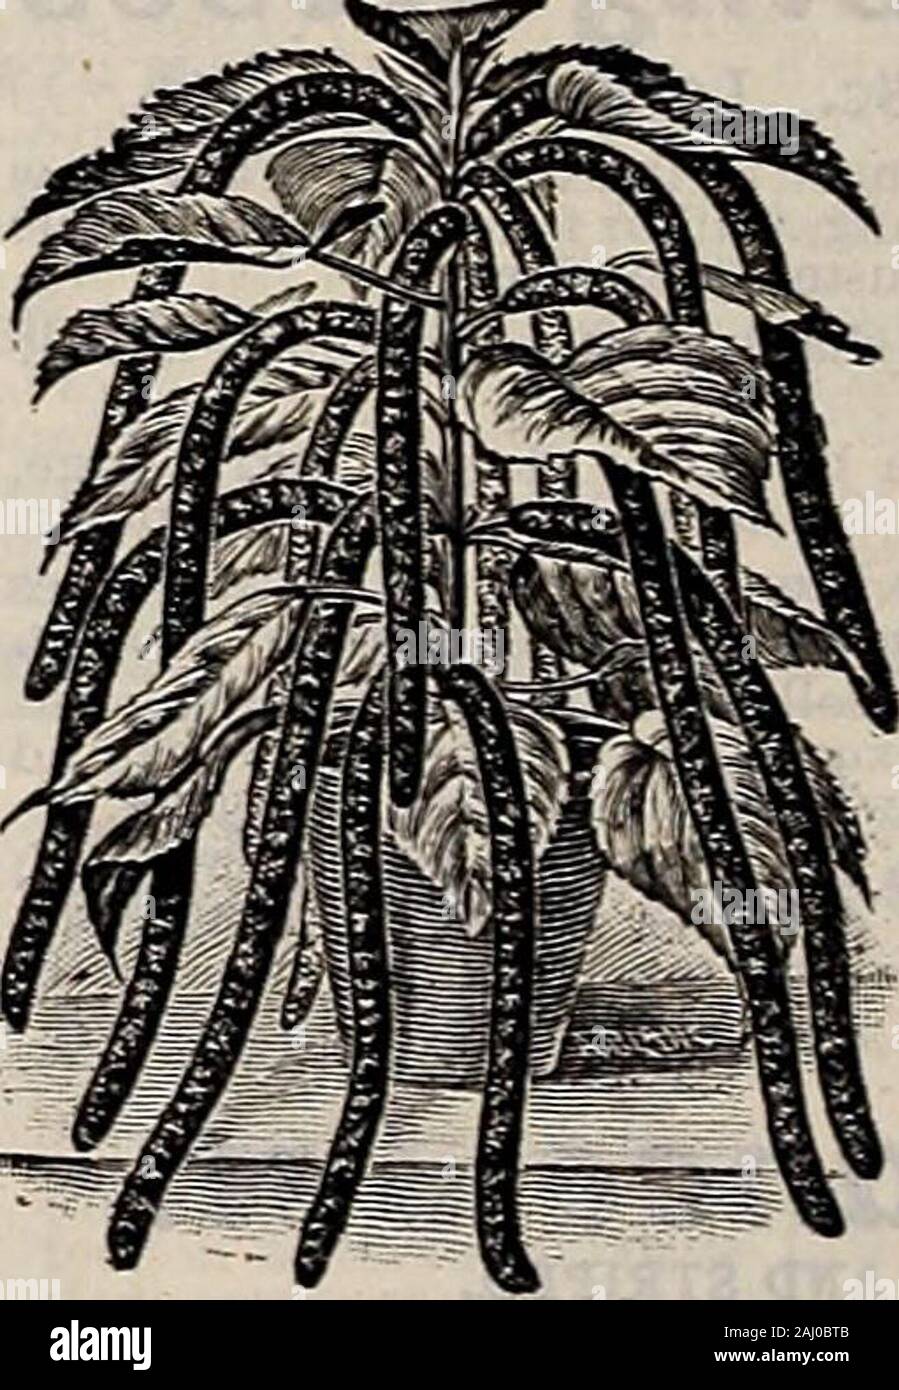 Livingston's seeds : 1902 'true blue' annual . ASPARAGUS SPRENGERI.. (Acalyphia Sanderii—A mosttinct and striking new plant; CHENILLE PLANT. Ptatycodon Grandiflorum. Chinese Bell-Flower — Bloomsthe entire season. The flower is largebell-shaped, of a deep shade of blue.An extremely rapid growing plant,will do well in any ordinary gardensoil. Perfectly hardy, making adense branching bush 2 to 3 feet high.Plants, each, loc; 2 for 25c.; 5 for 50&lt;-. Vnr^r^rt Adams Heedle—AI UCCa. tropicallookingplant, with long narrow leaves thatremain green the entire year; flowerstems, 3 to 4 feet high, bearin Stock Photo